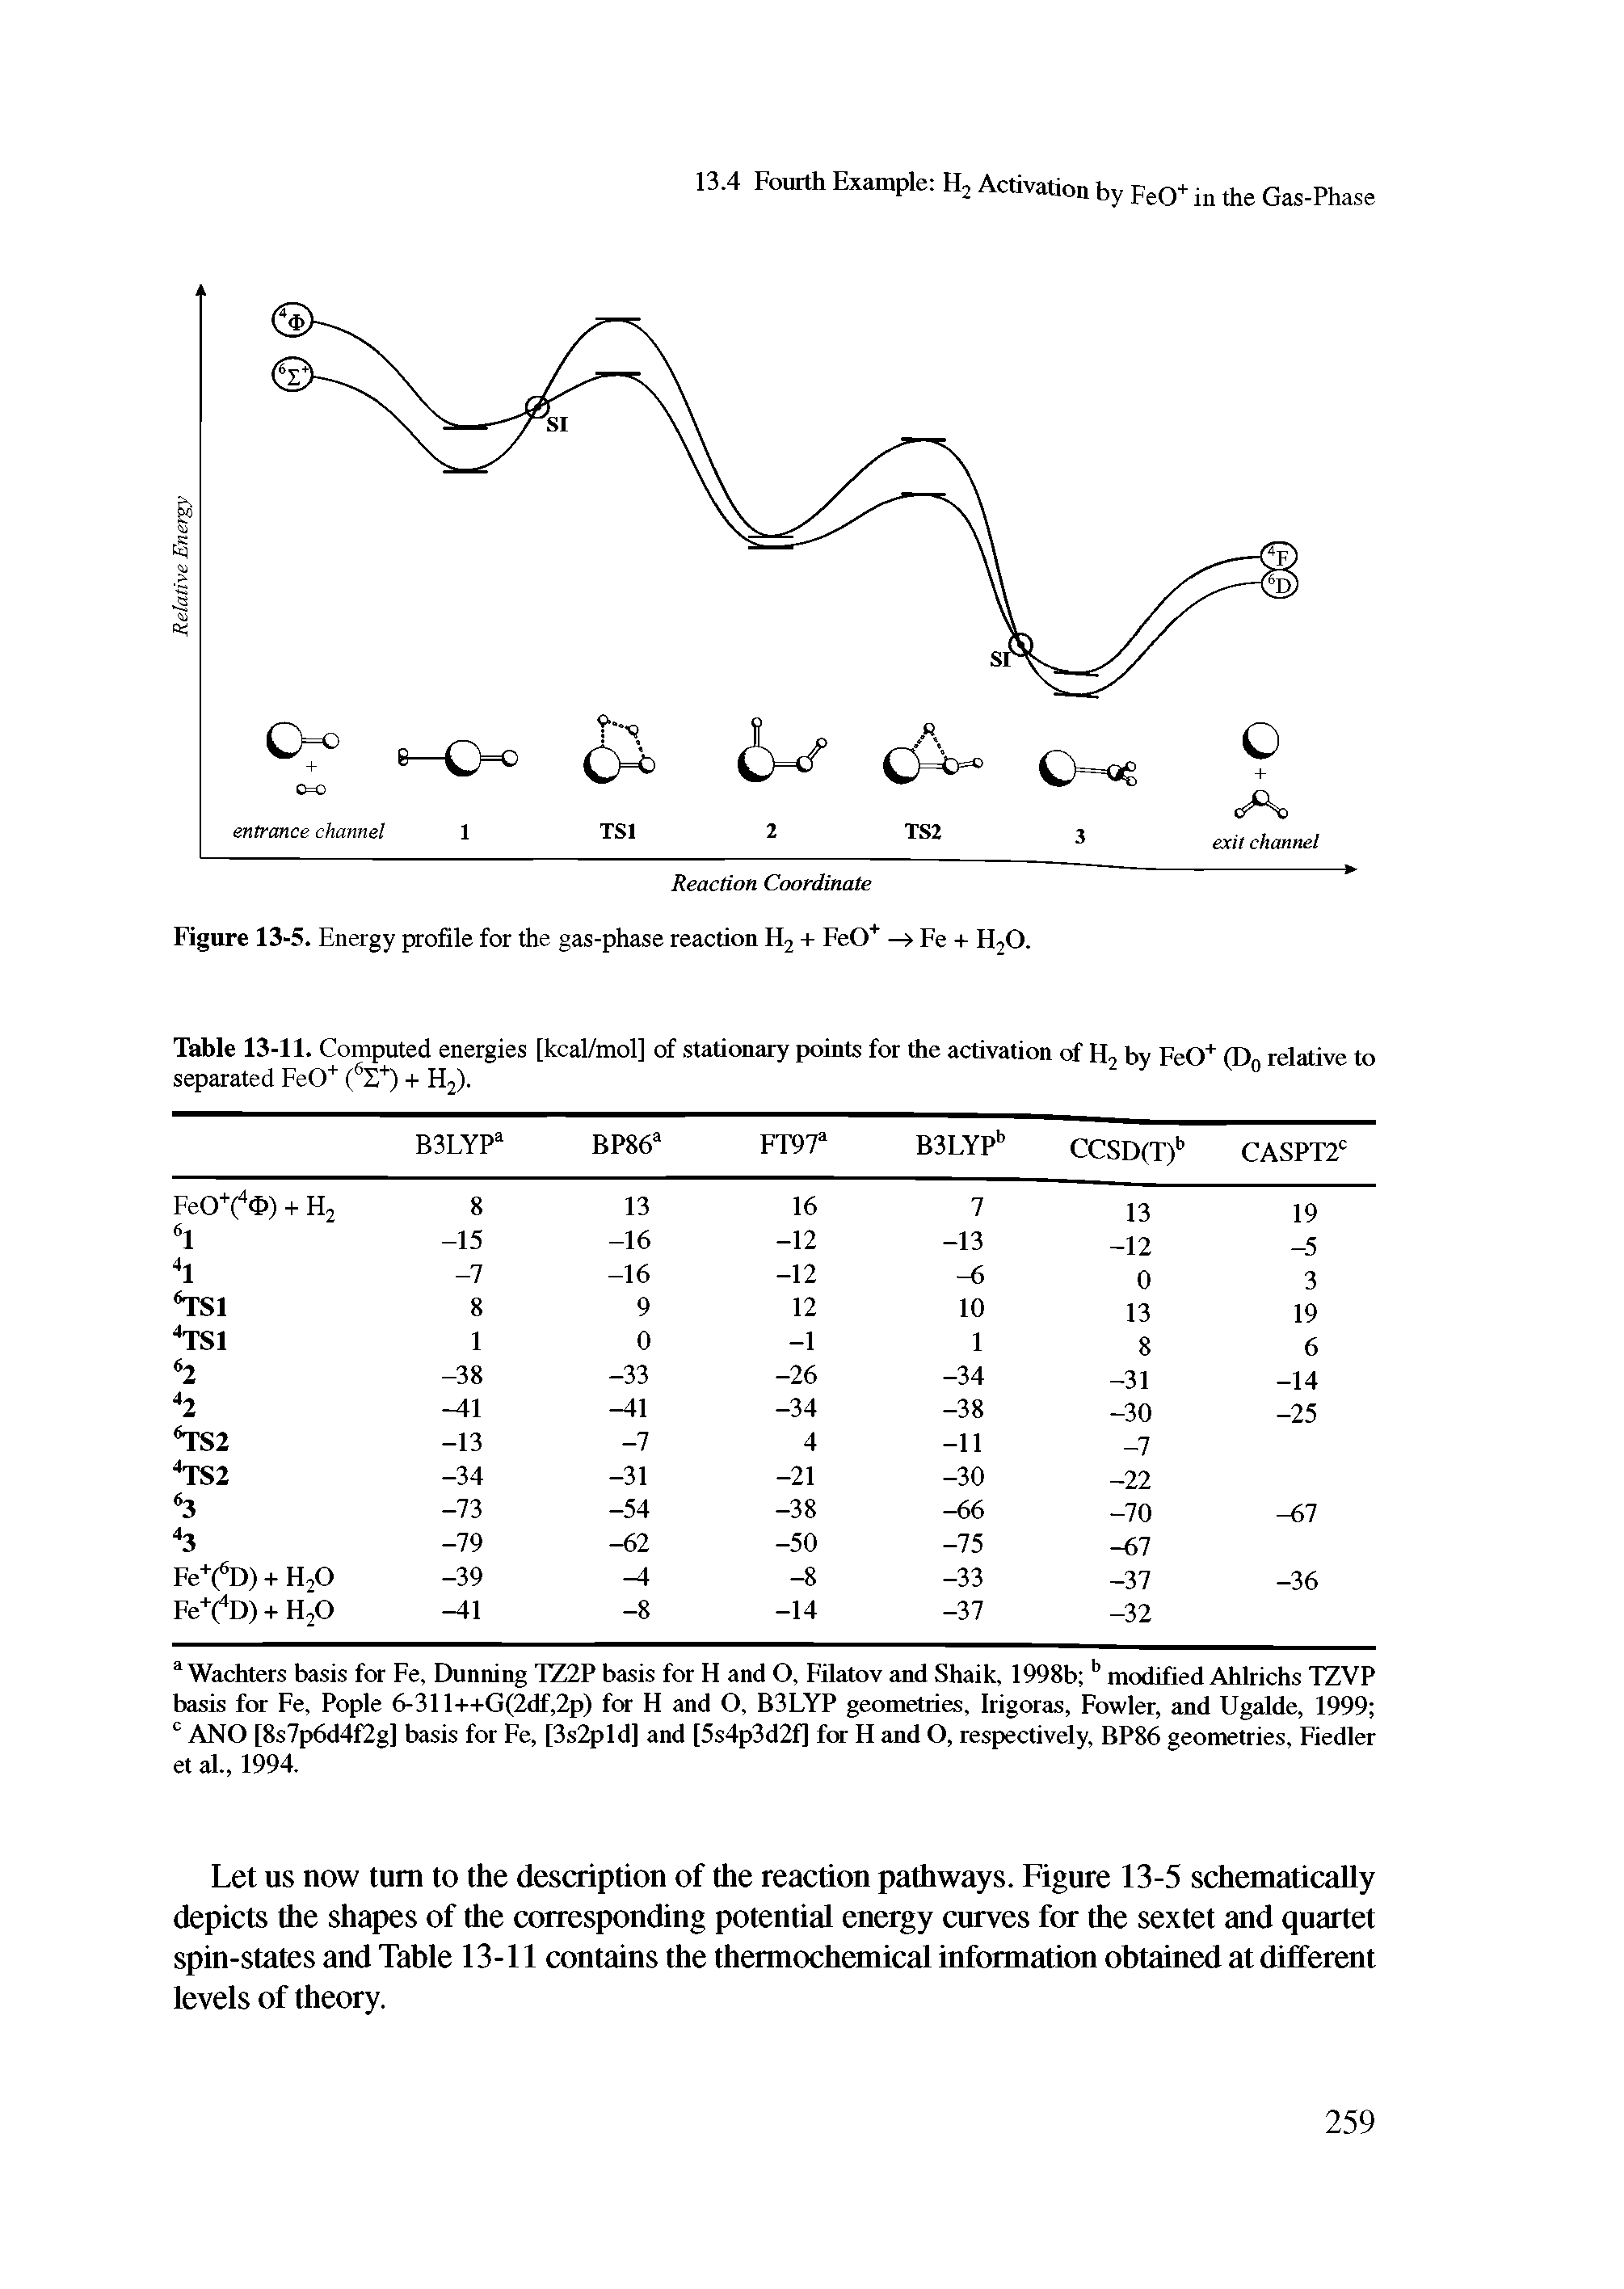 Table 13-11. Computed energies [kcal/mol] of stationary points for the activation of H2 by FeO+ (Dn relative to separated FeO+ (6S+) + H2).